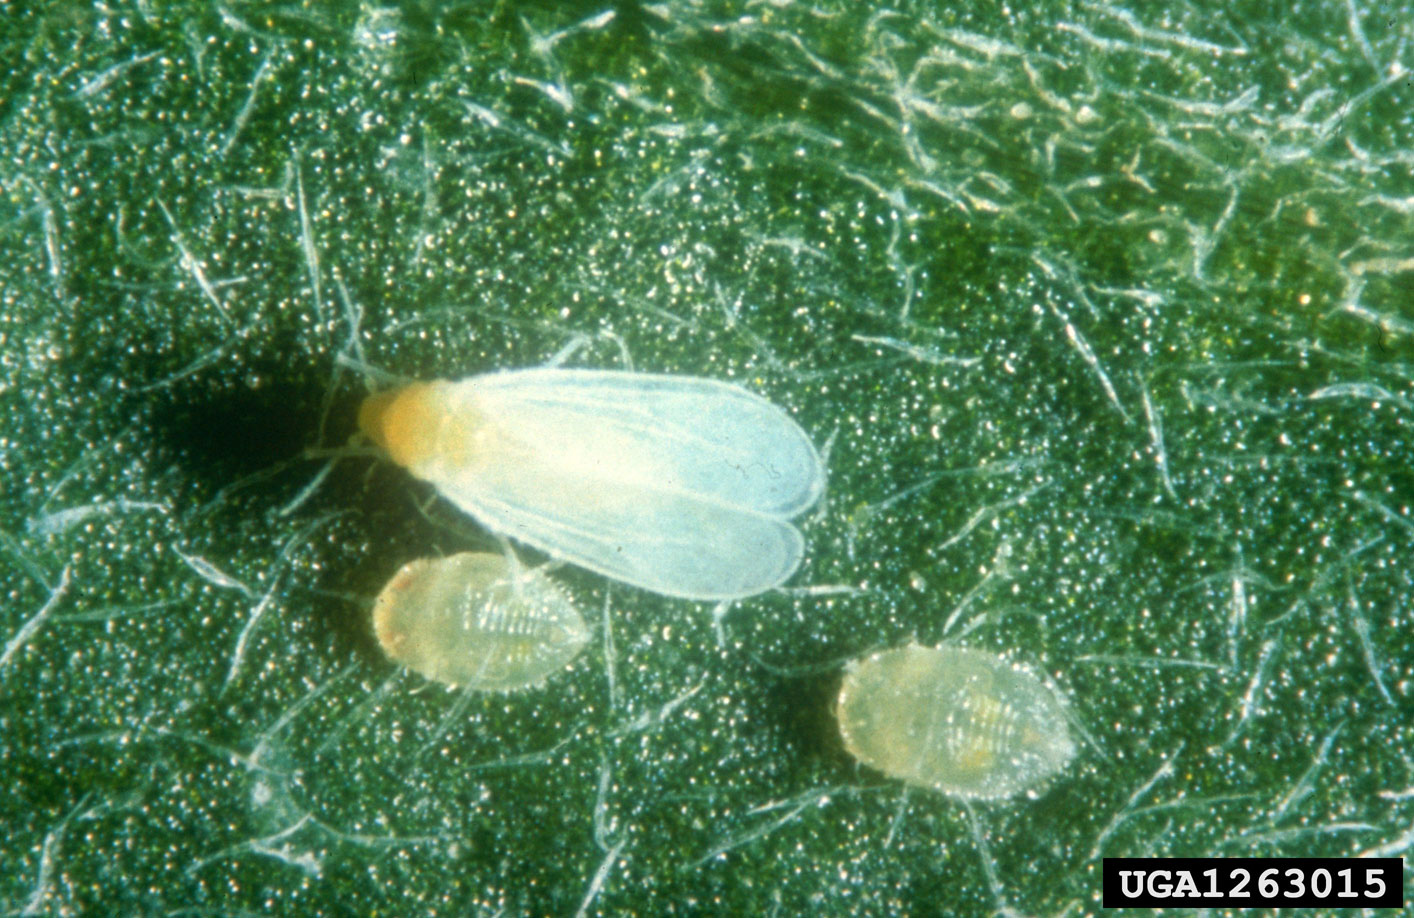 Greenhouse whitefly adult and larvae.